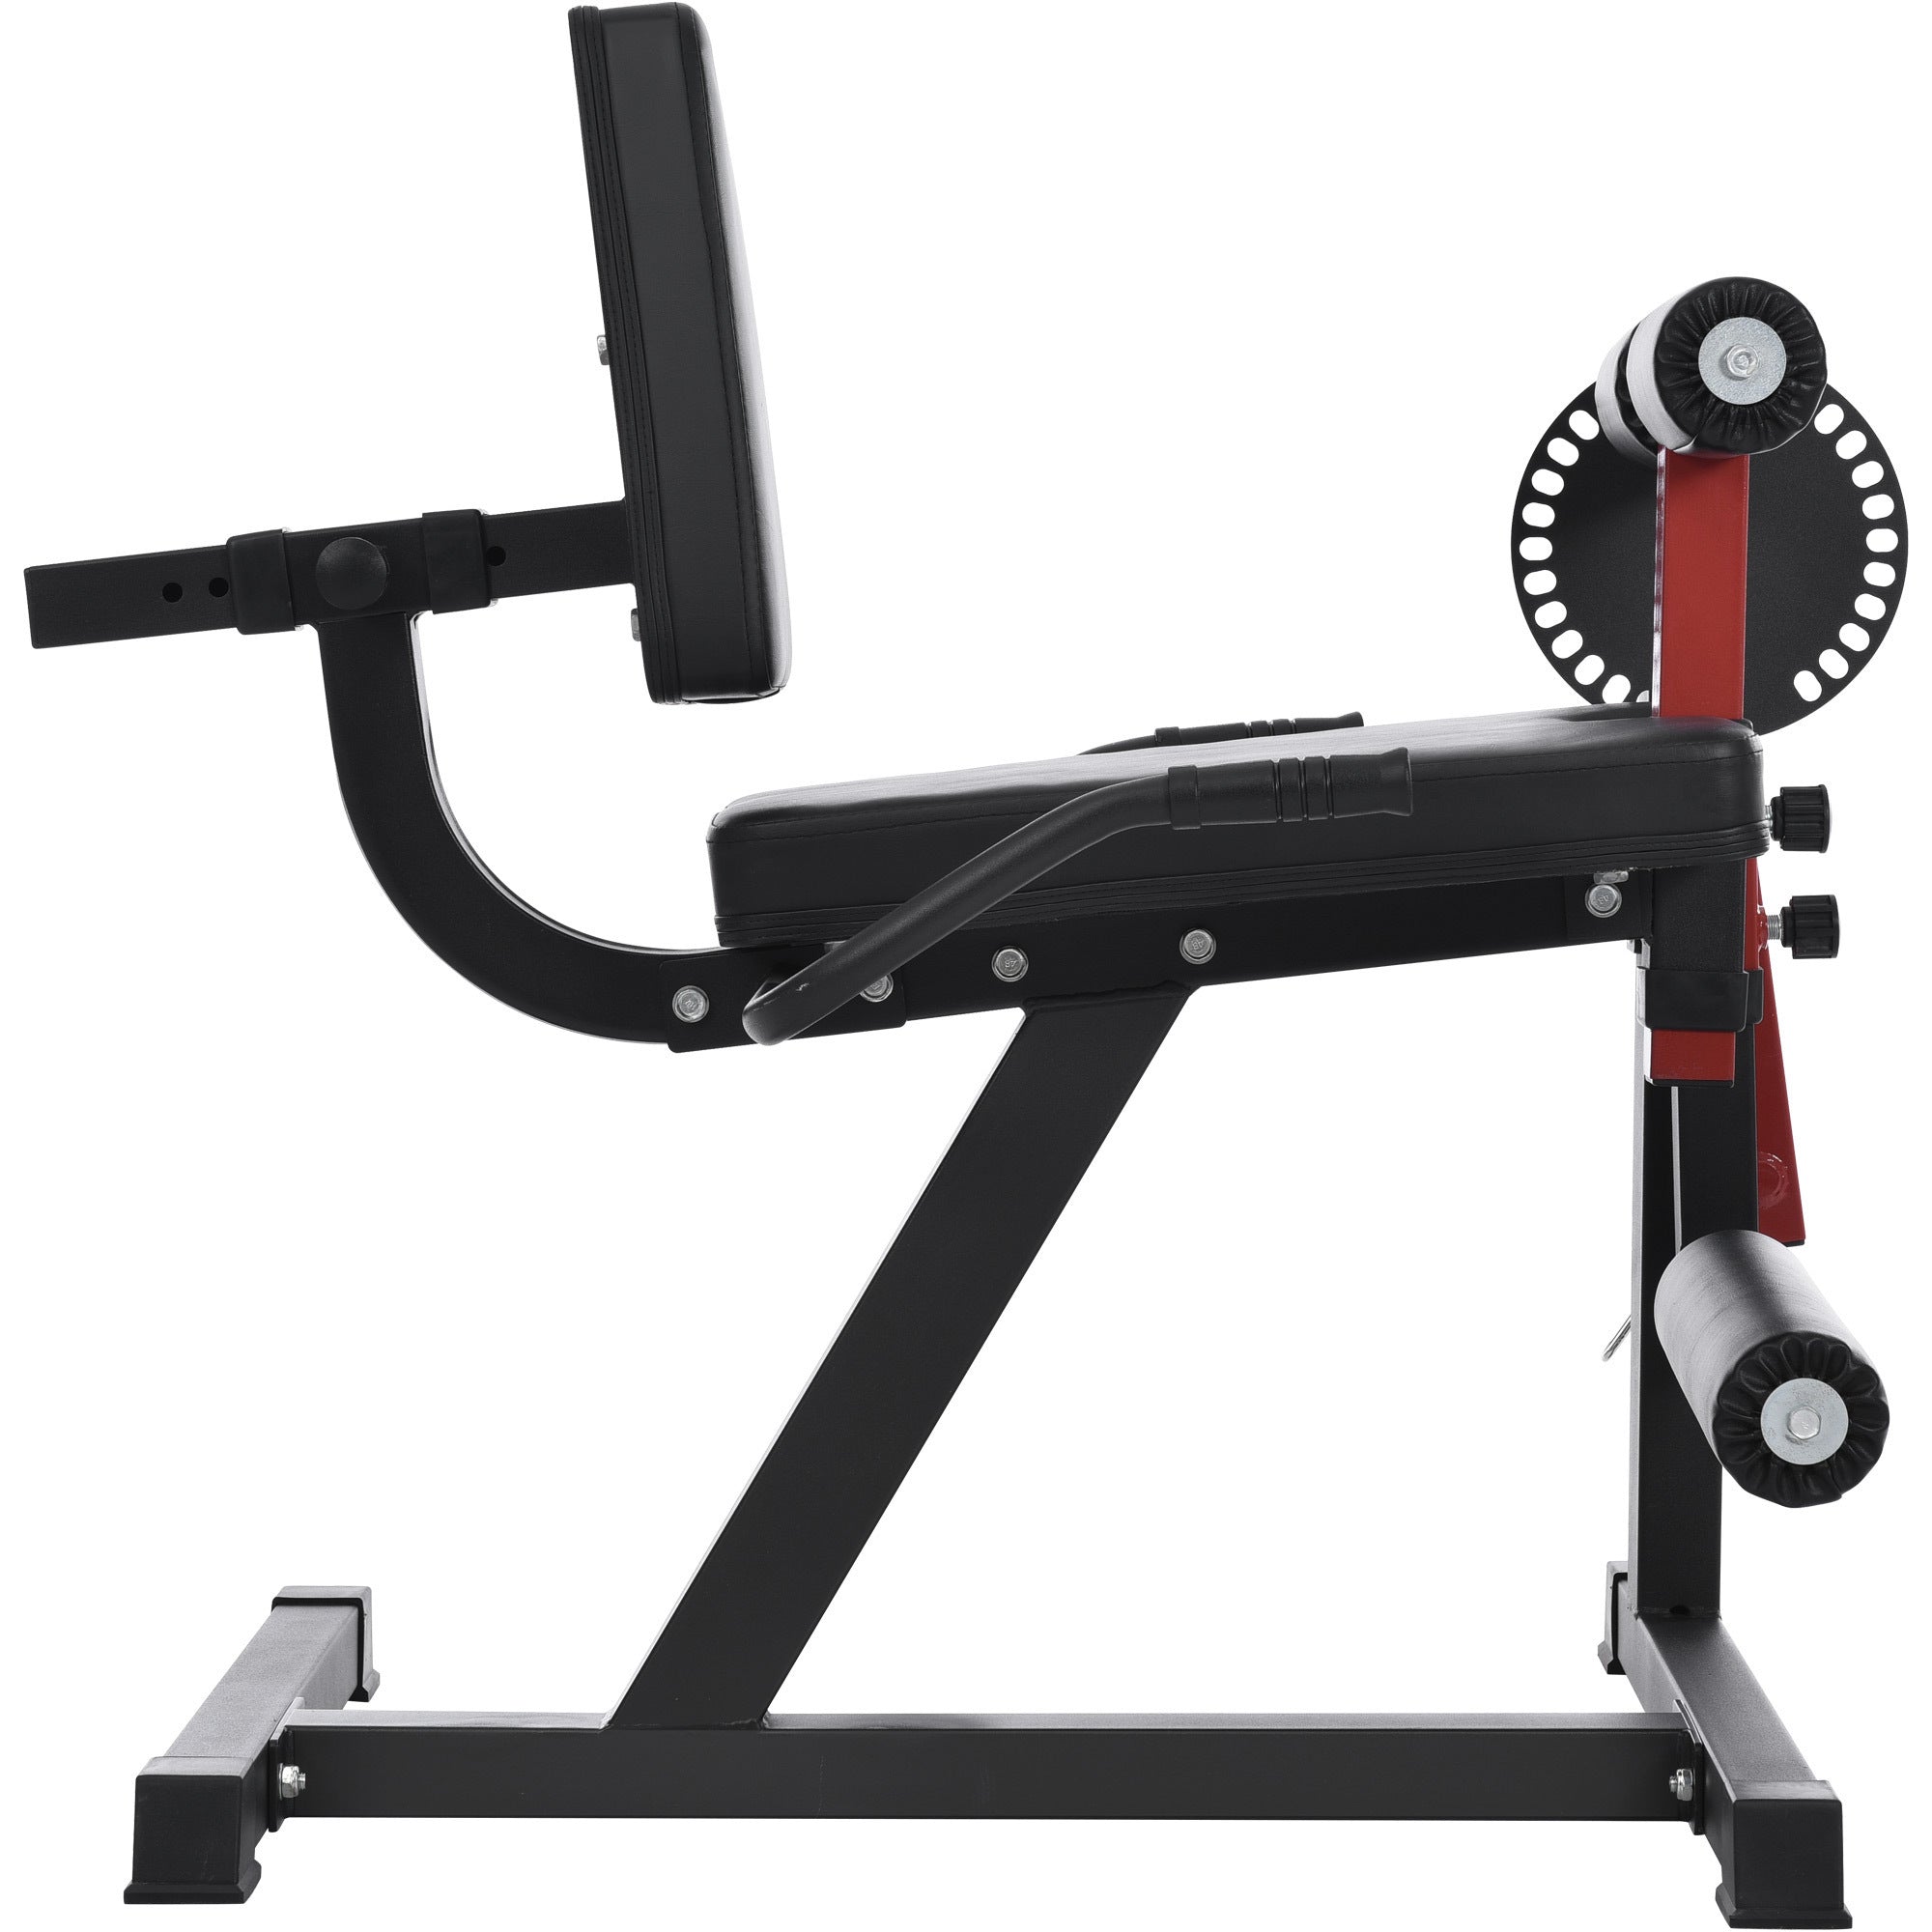 Leg Extension and Curl Machine - Leg Exercise Machine with Adjustable Seat Backrest and Rotary Leg Extension